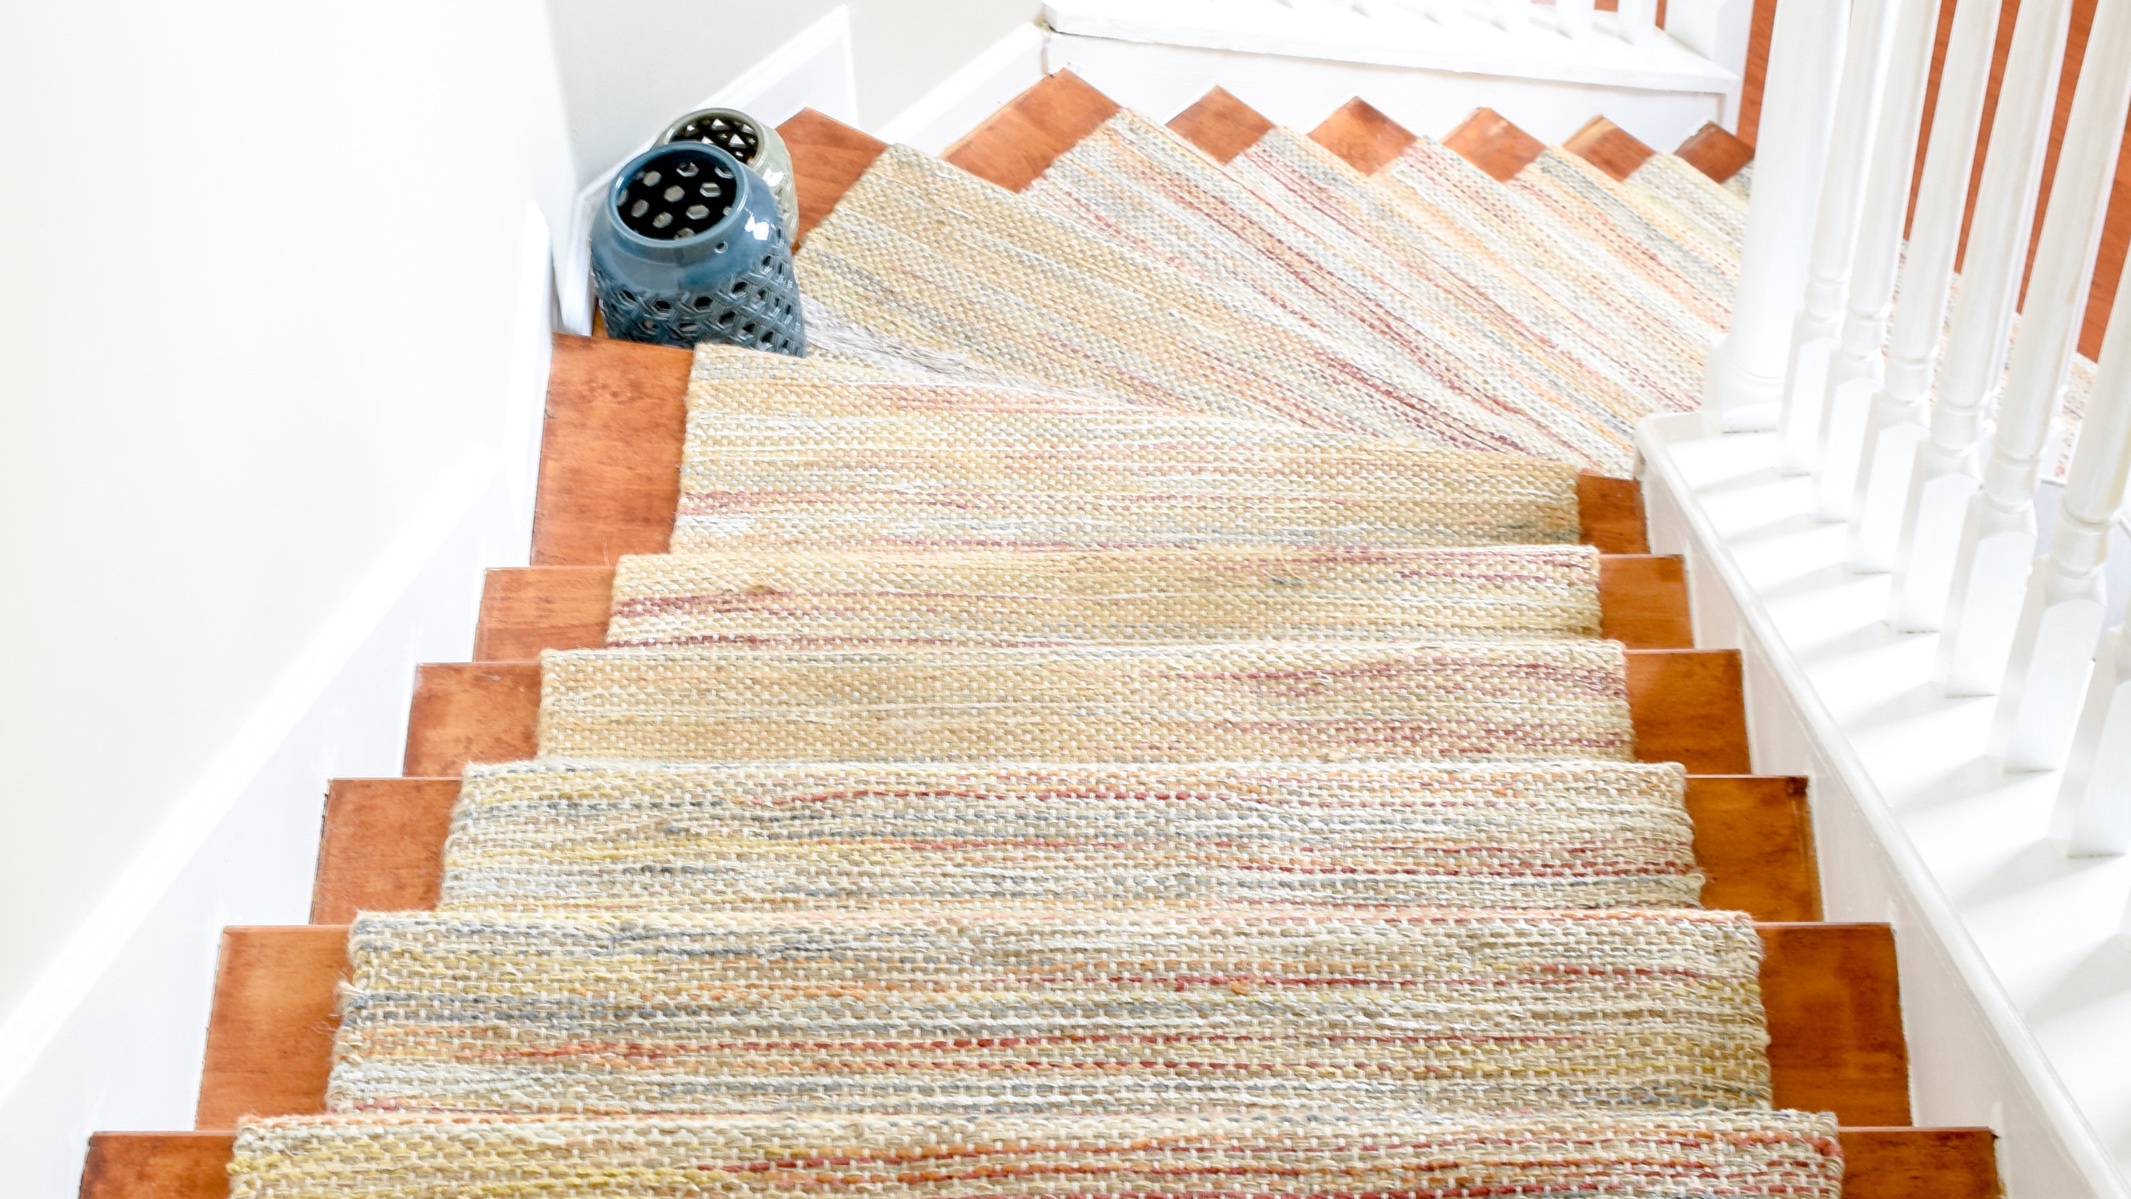 DIY Hardwood Staircase Makeover: Replacing Carpet With Wood Treads On Pie Steps And Curved Landings - Today, I’m showing you how I created a template to create the deeper stair treads that pie step landing required so you can do it yourself!